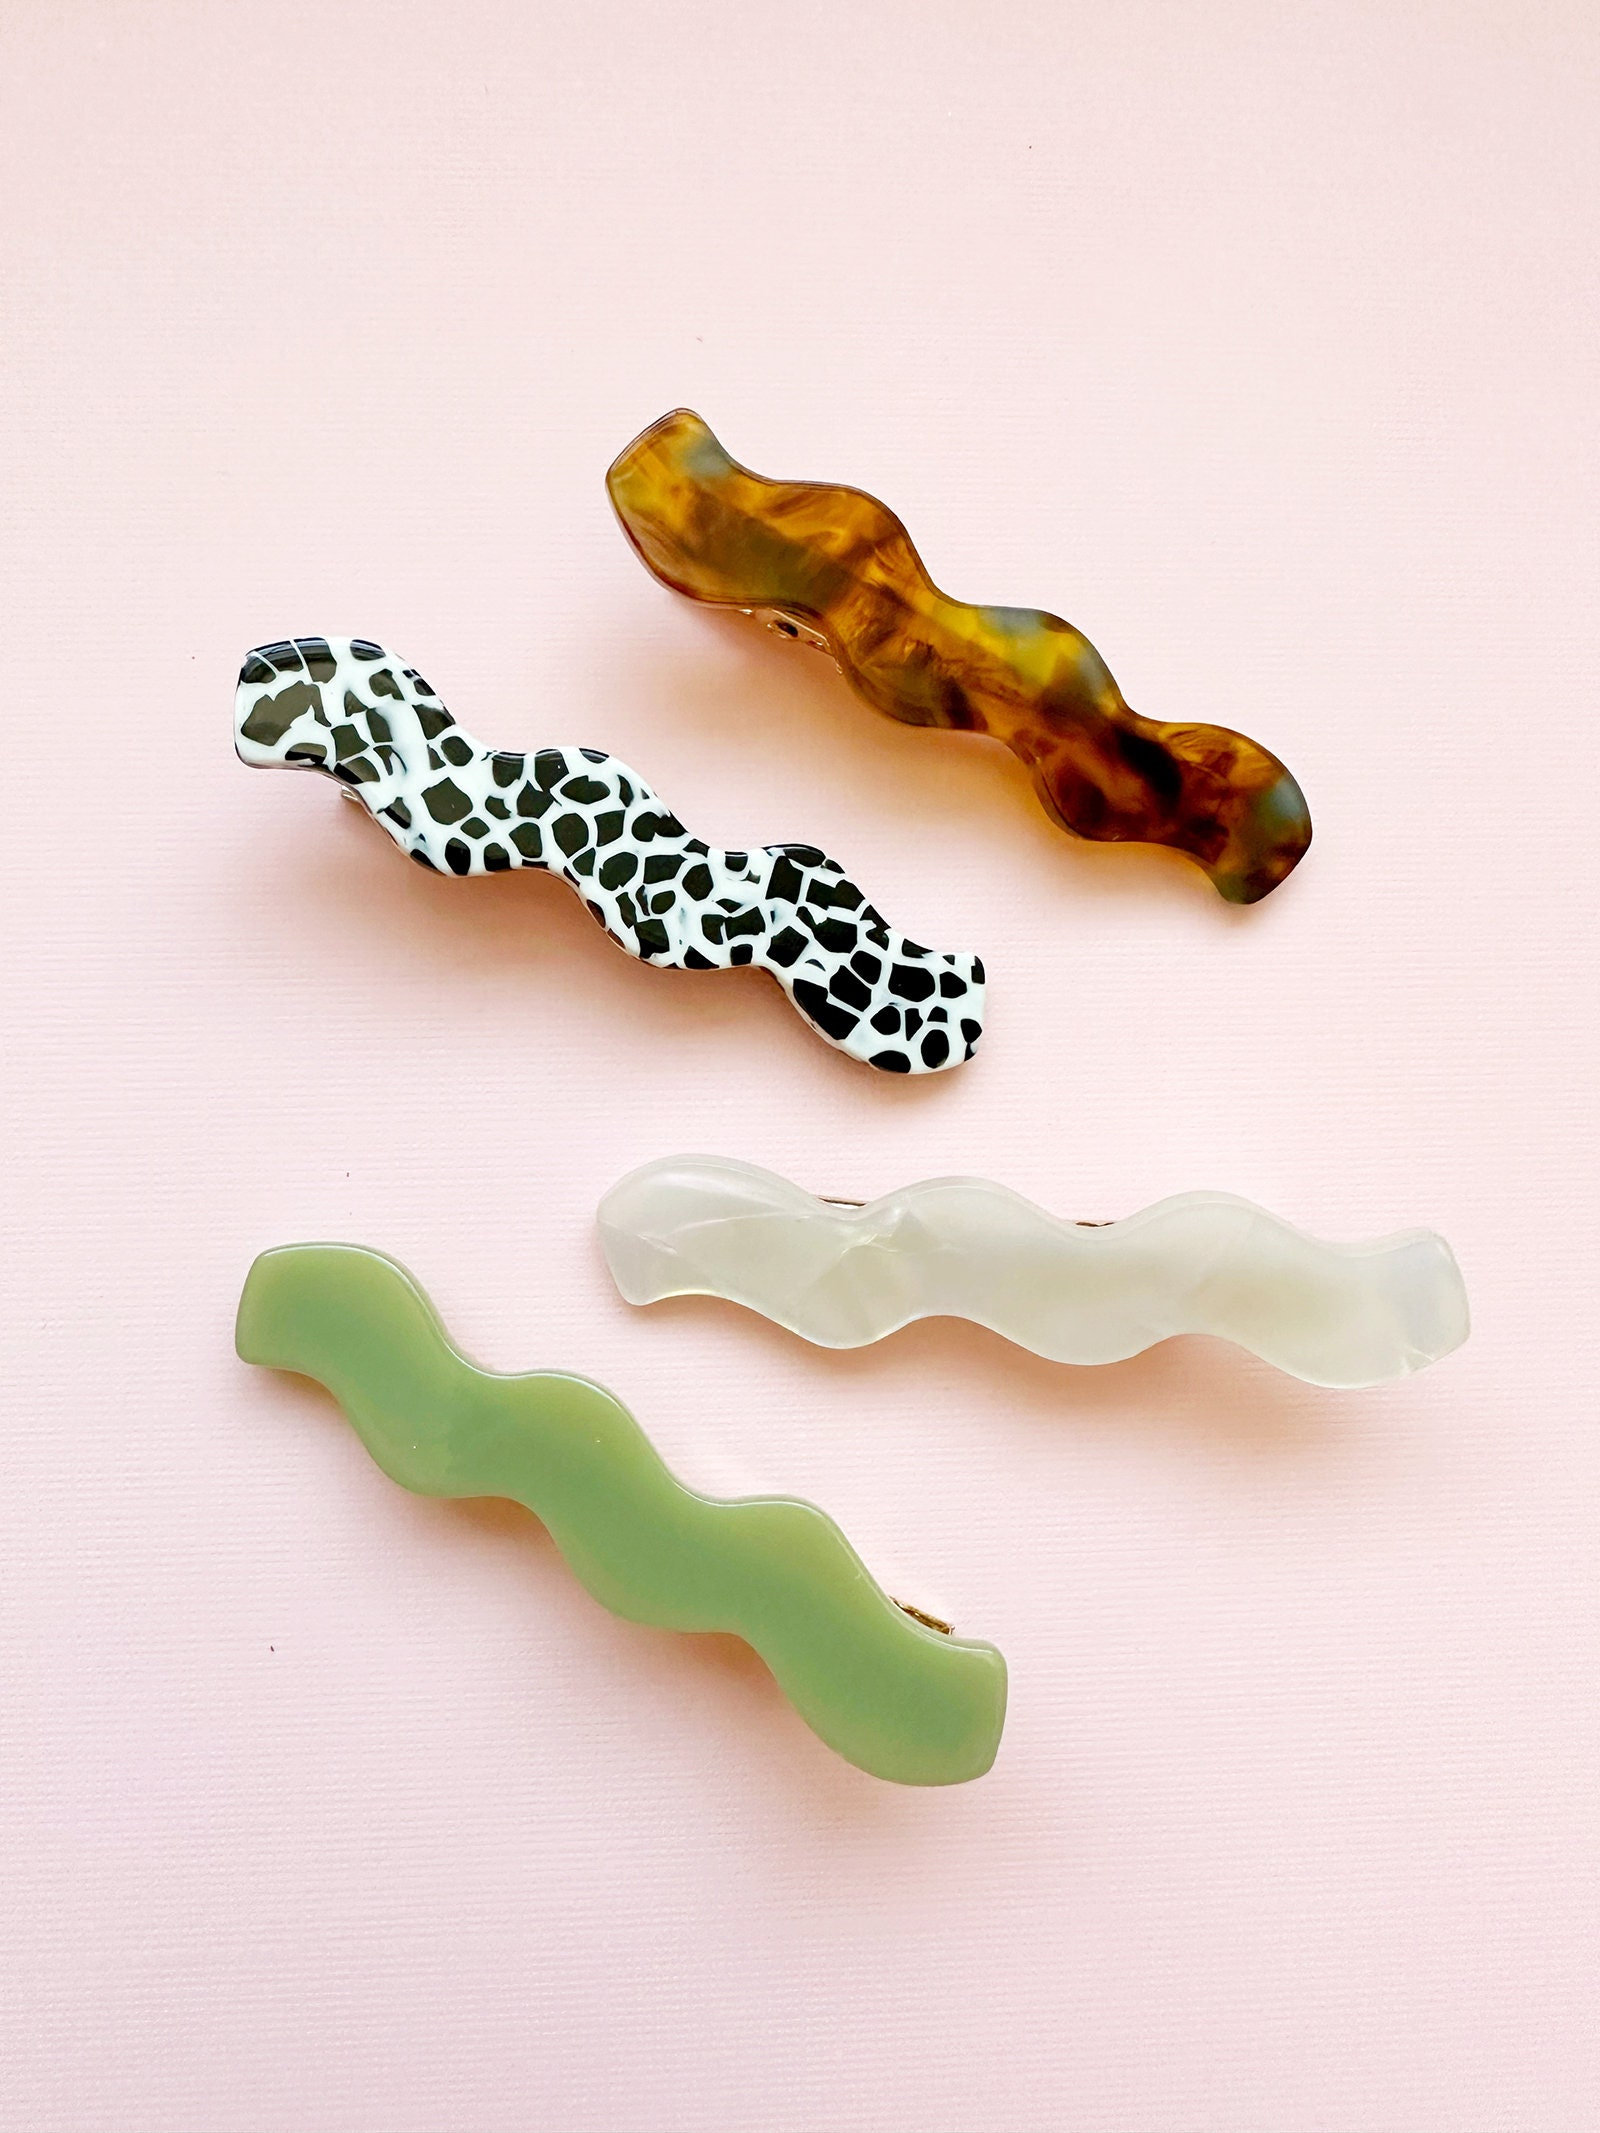 Nonmetallic Plastic Clips for Hair Extensions